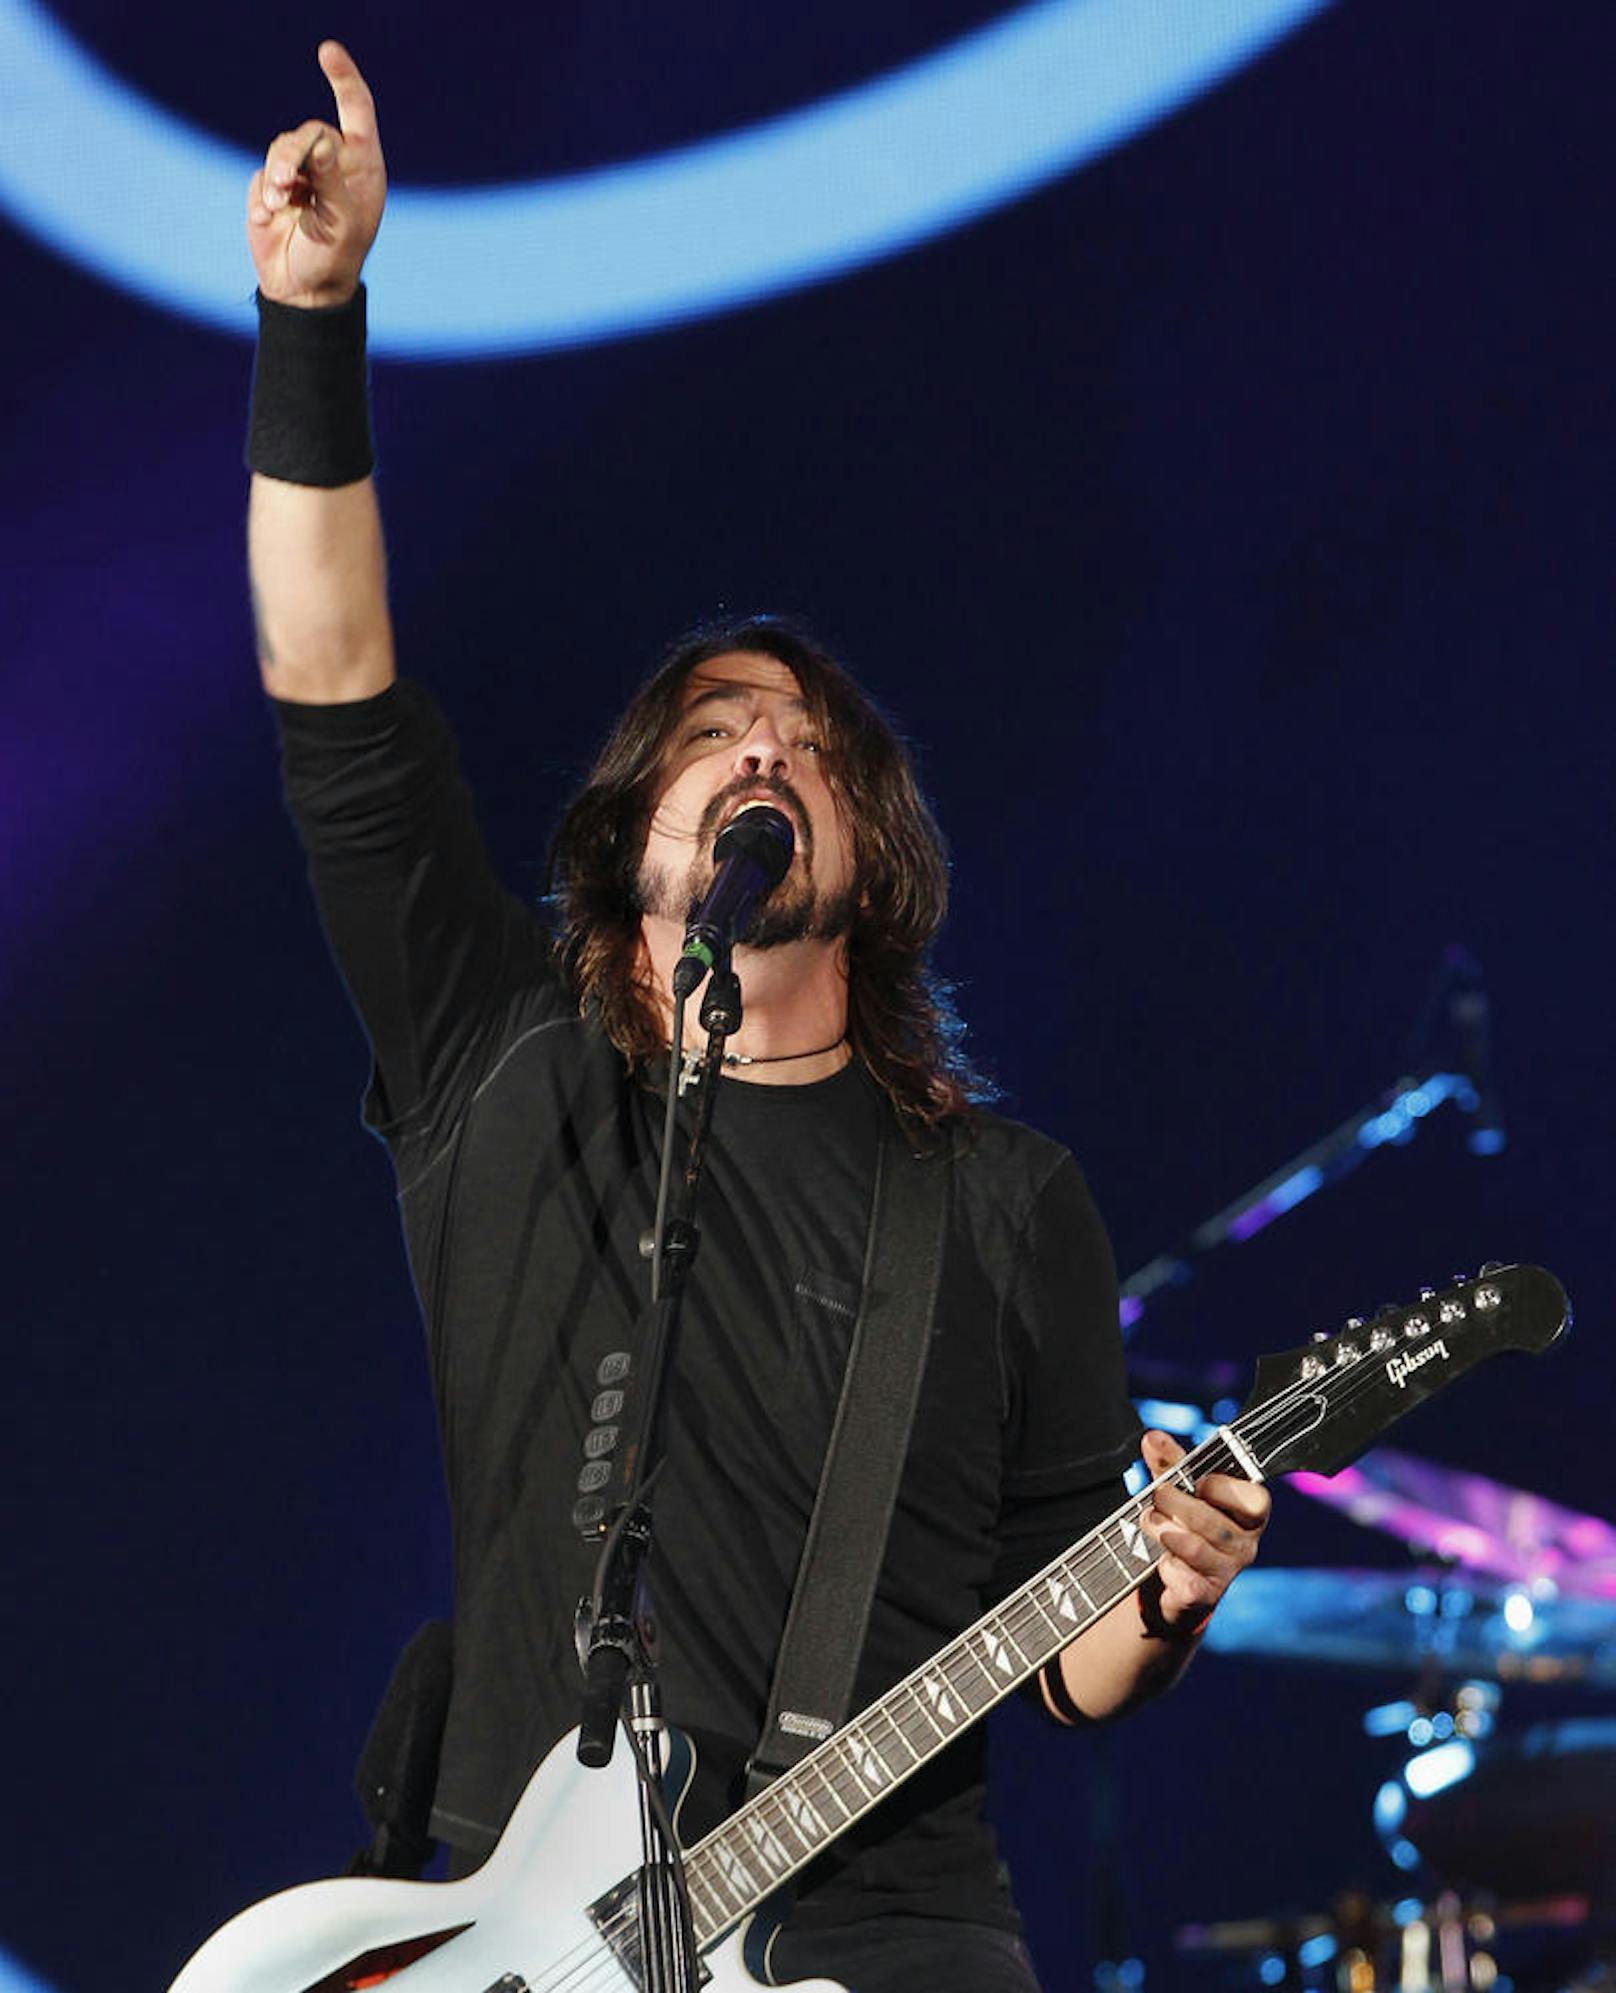 Dave Grohl, Leadsänger der Foo Fighters